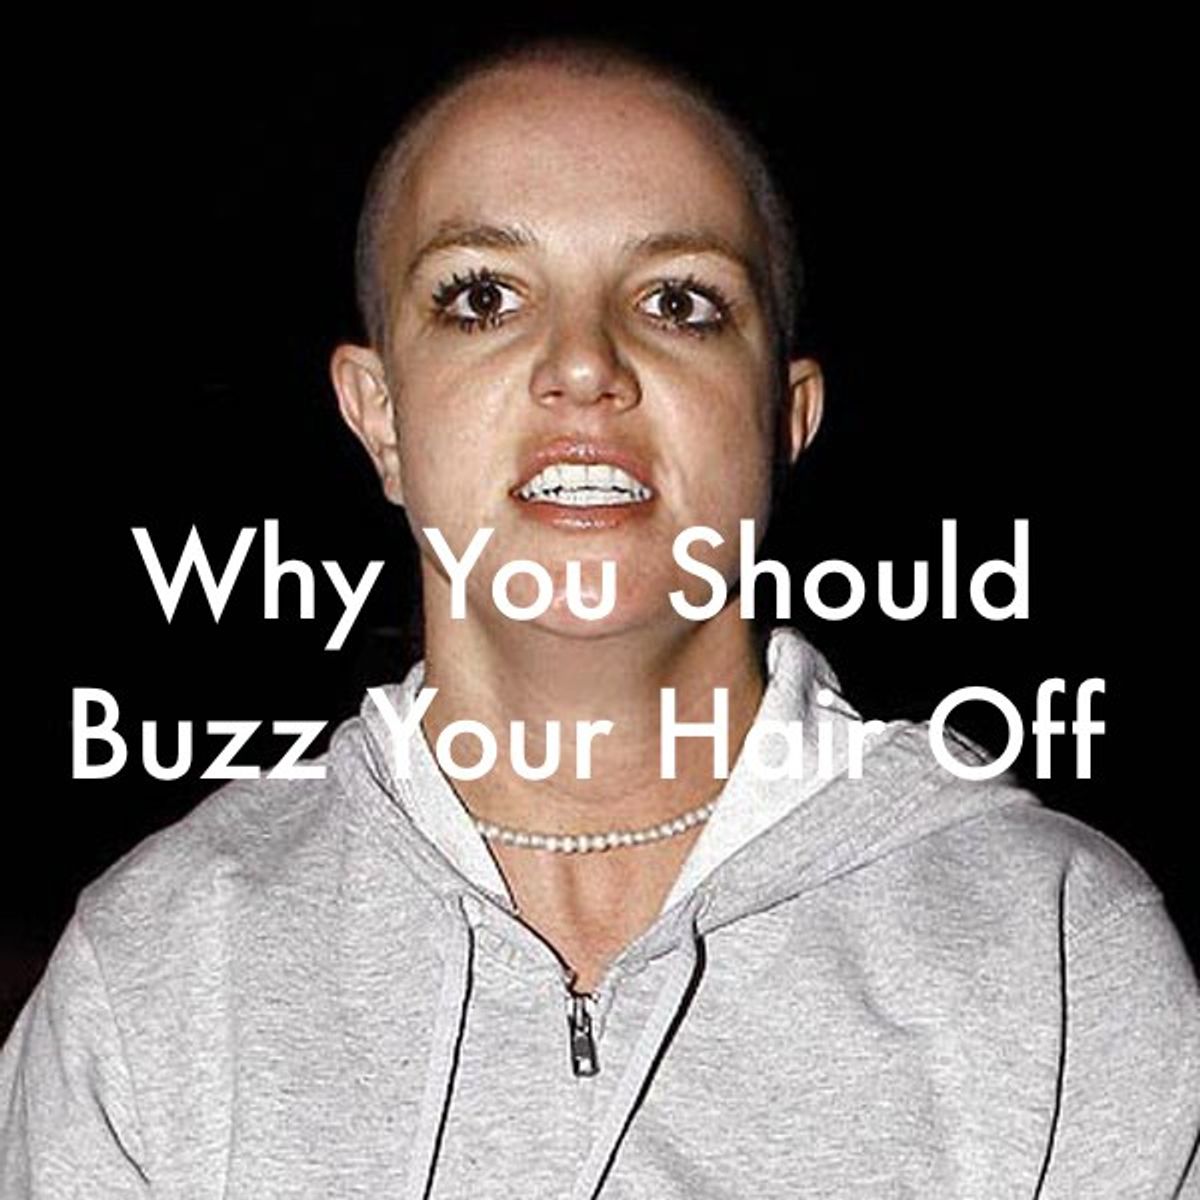 Why You Should Buzz Your Hair Off